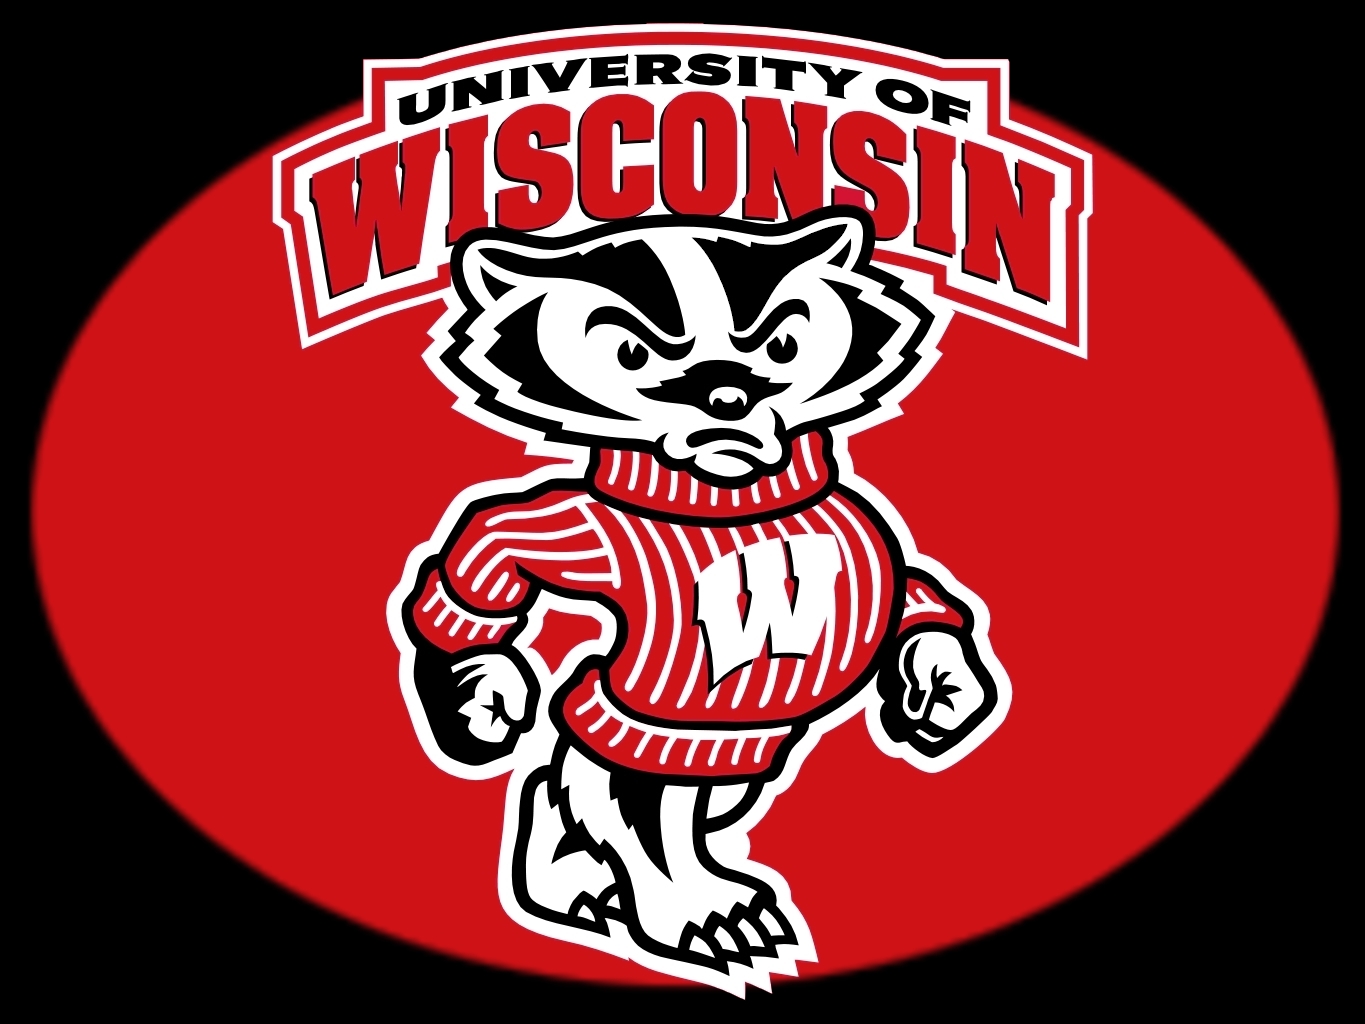 Wisconsin Badgers Basketball Tickets Wow